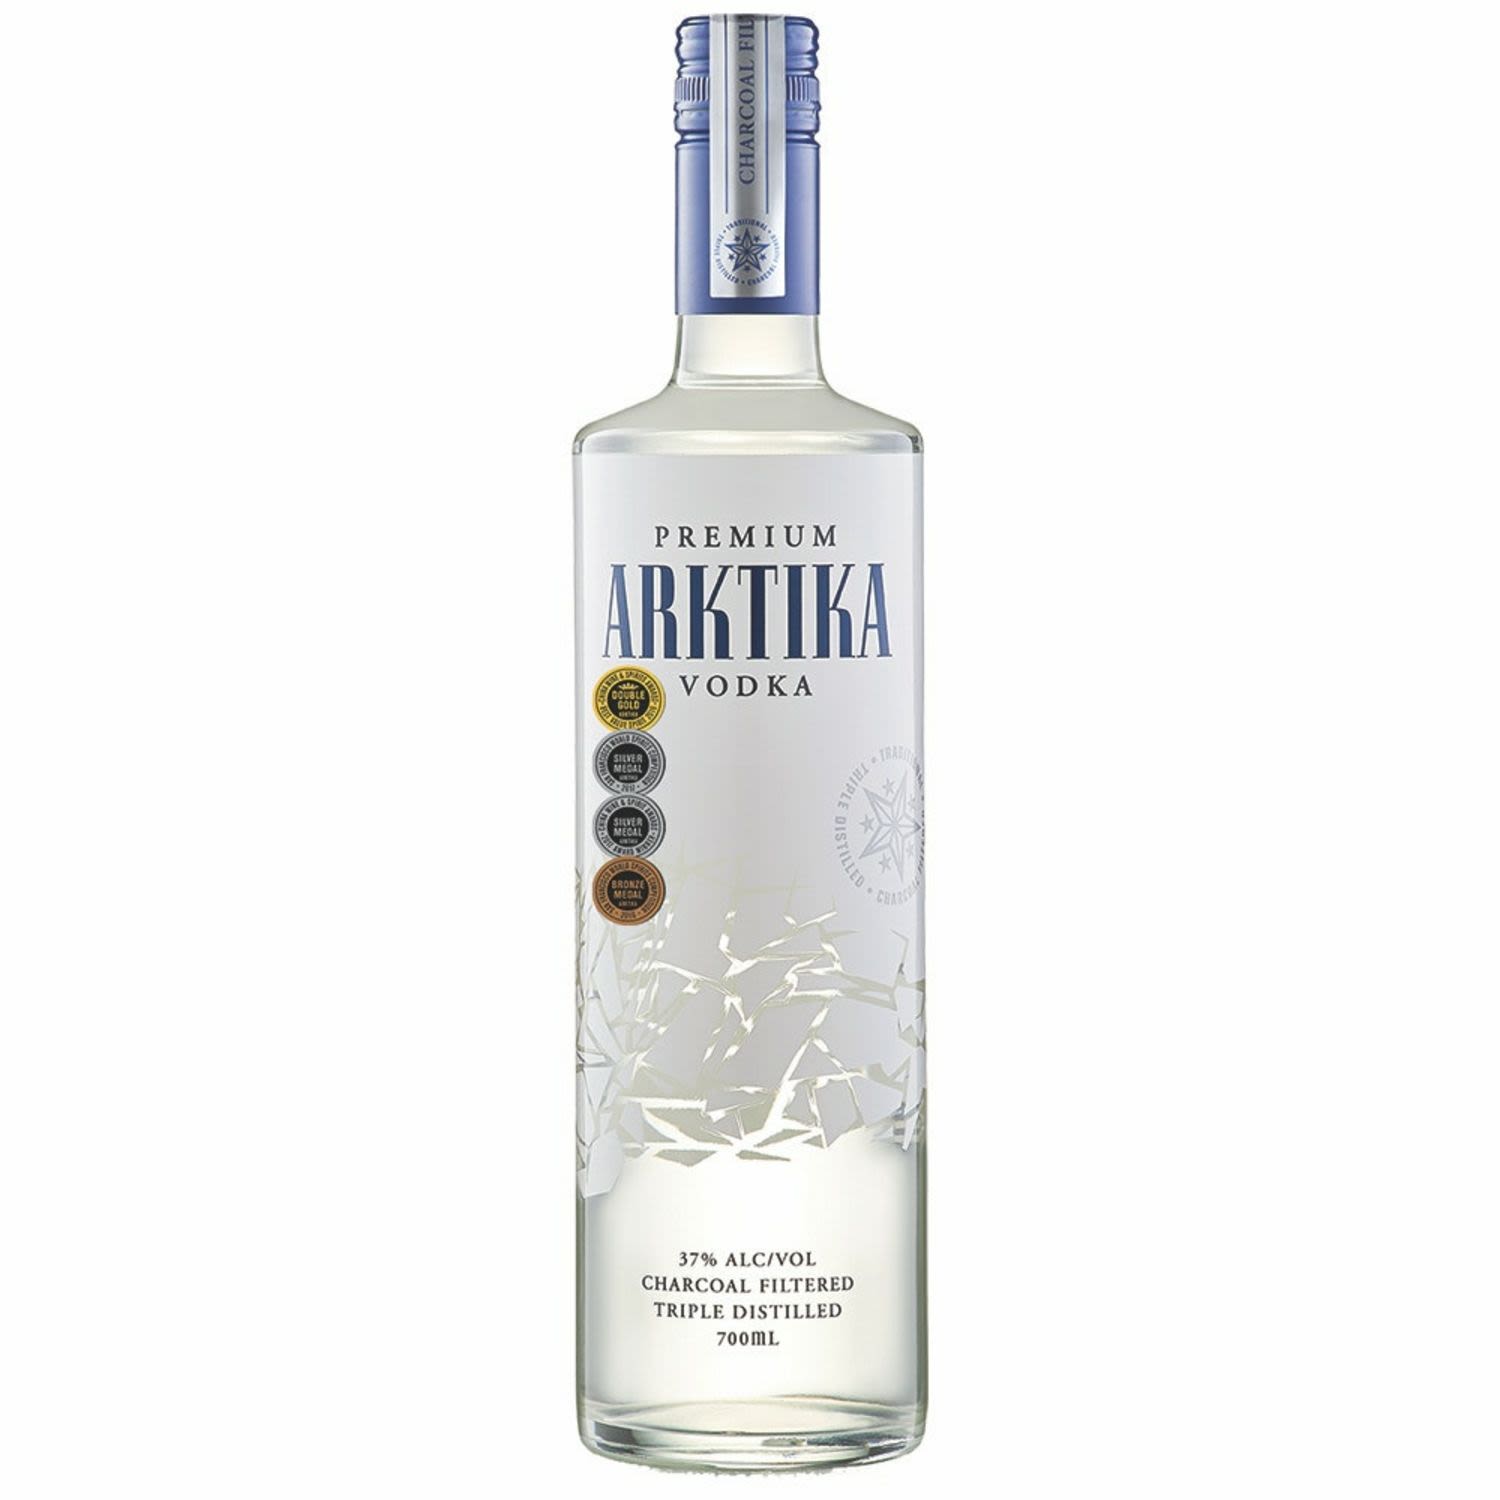 This smooth, silky, full bodied vodka opens with notes of grain that become softer before peach ripeness comes to the forefront. It exhibits a well balanced slightly spicy nutty taste. Finishes with a delicate dry berry fade, sweet creamy notes and a delicate balance of alcohol and sweetness.Triple distilled and charcoal filtered.<br /> <br />Alcohol Volume: 37.00%<br /><br />Pack Format: Bottle<br /><br />Standard Drinks: 20.4</br /><br />Pack Type: Bottle<br /><br />Country of Origin: Australia<br />